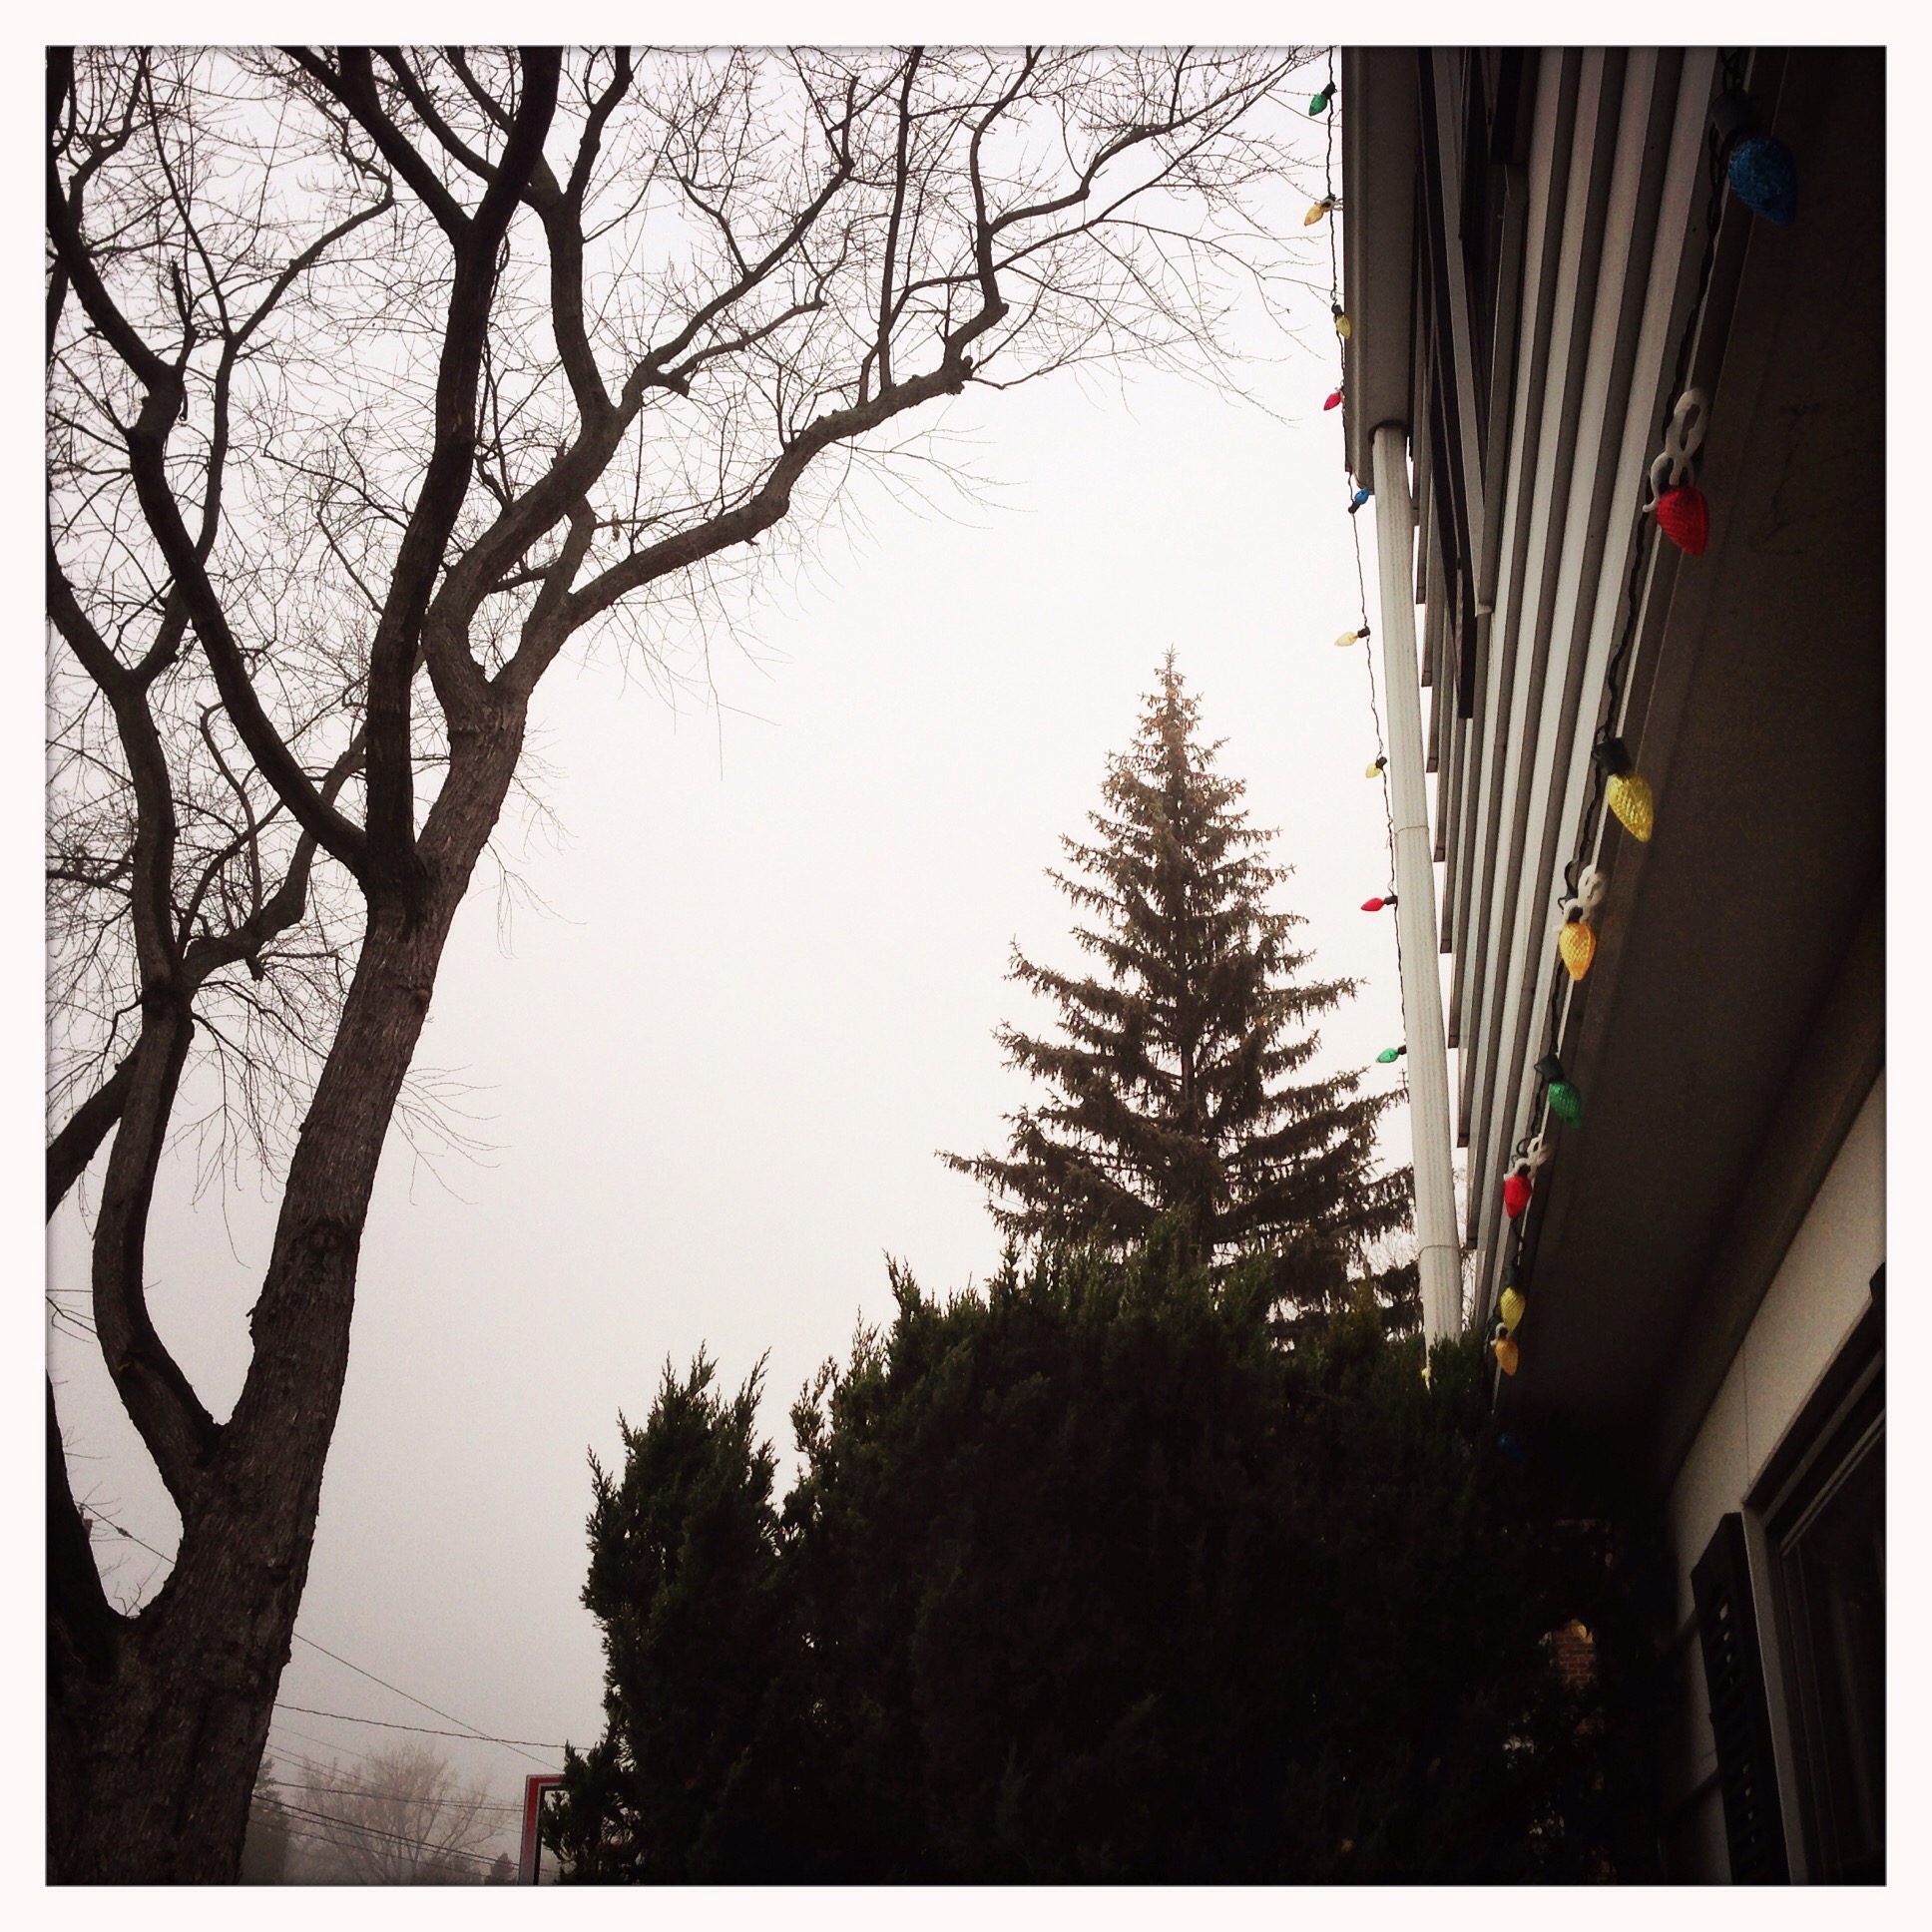 It’s Just the Weather – #reverb14, Day 3